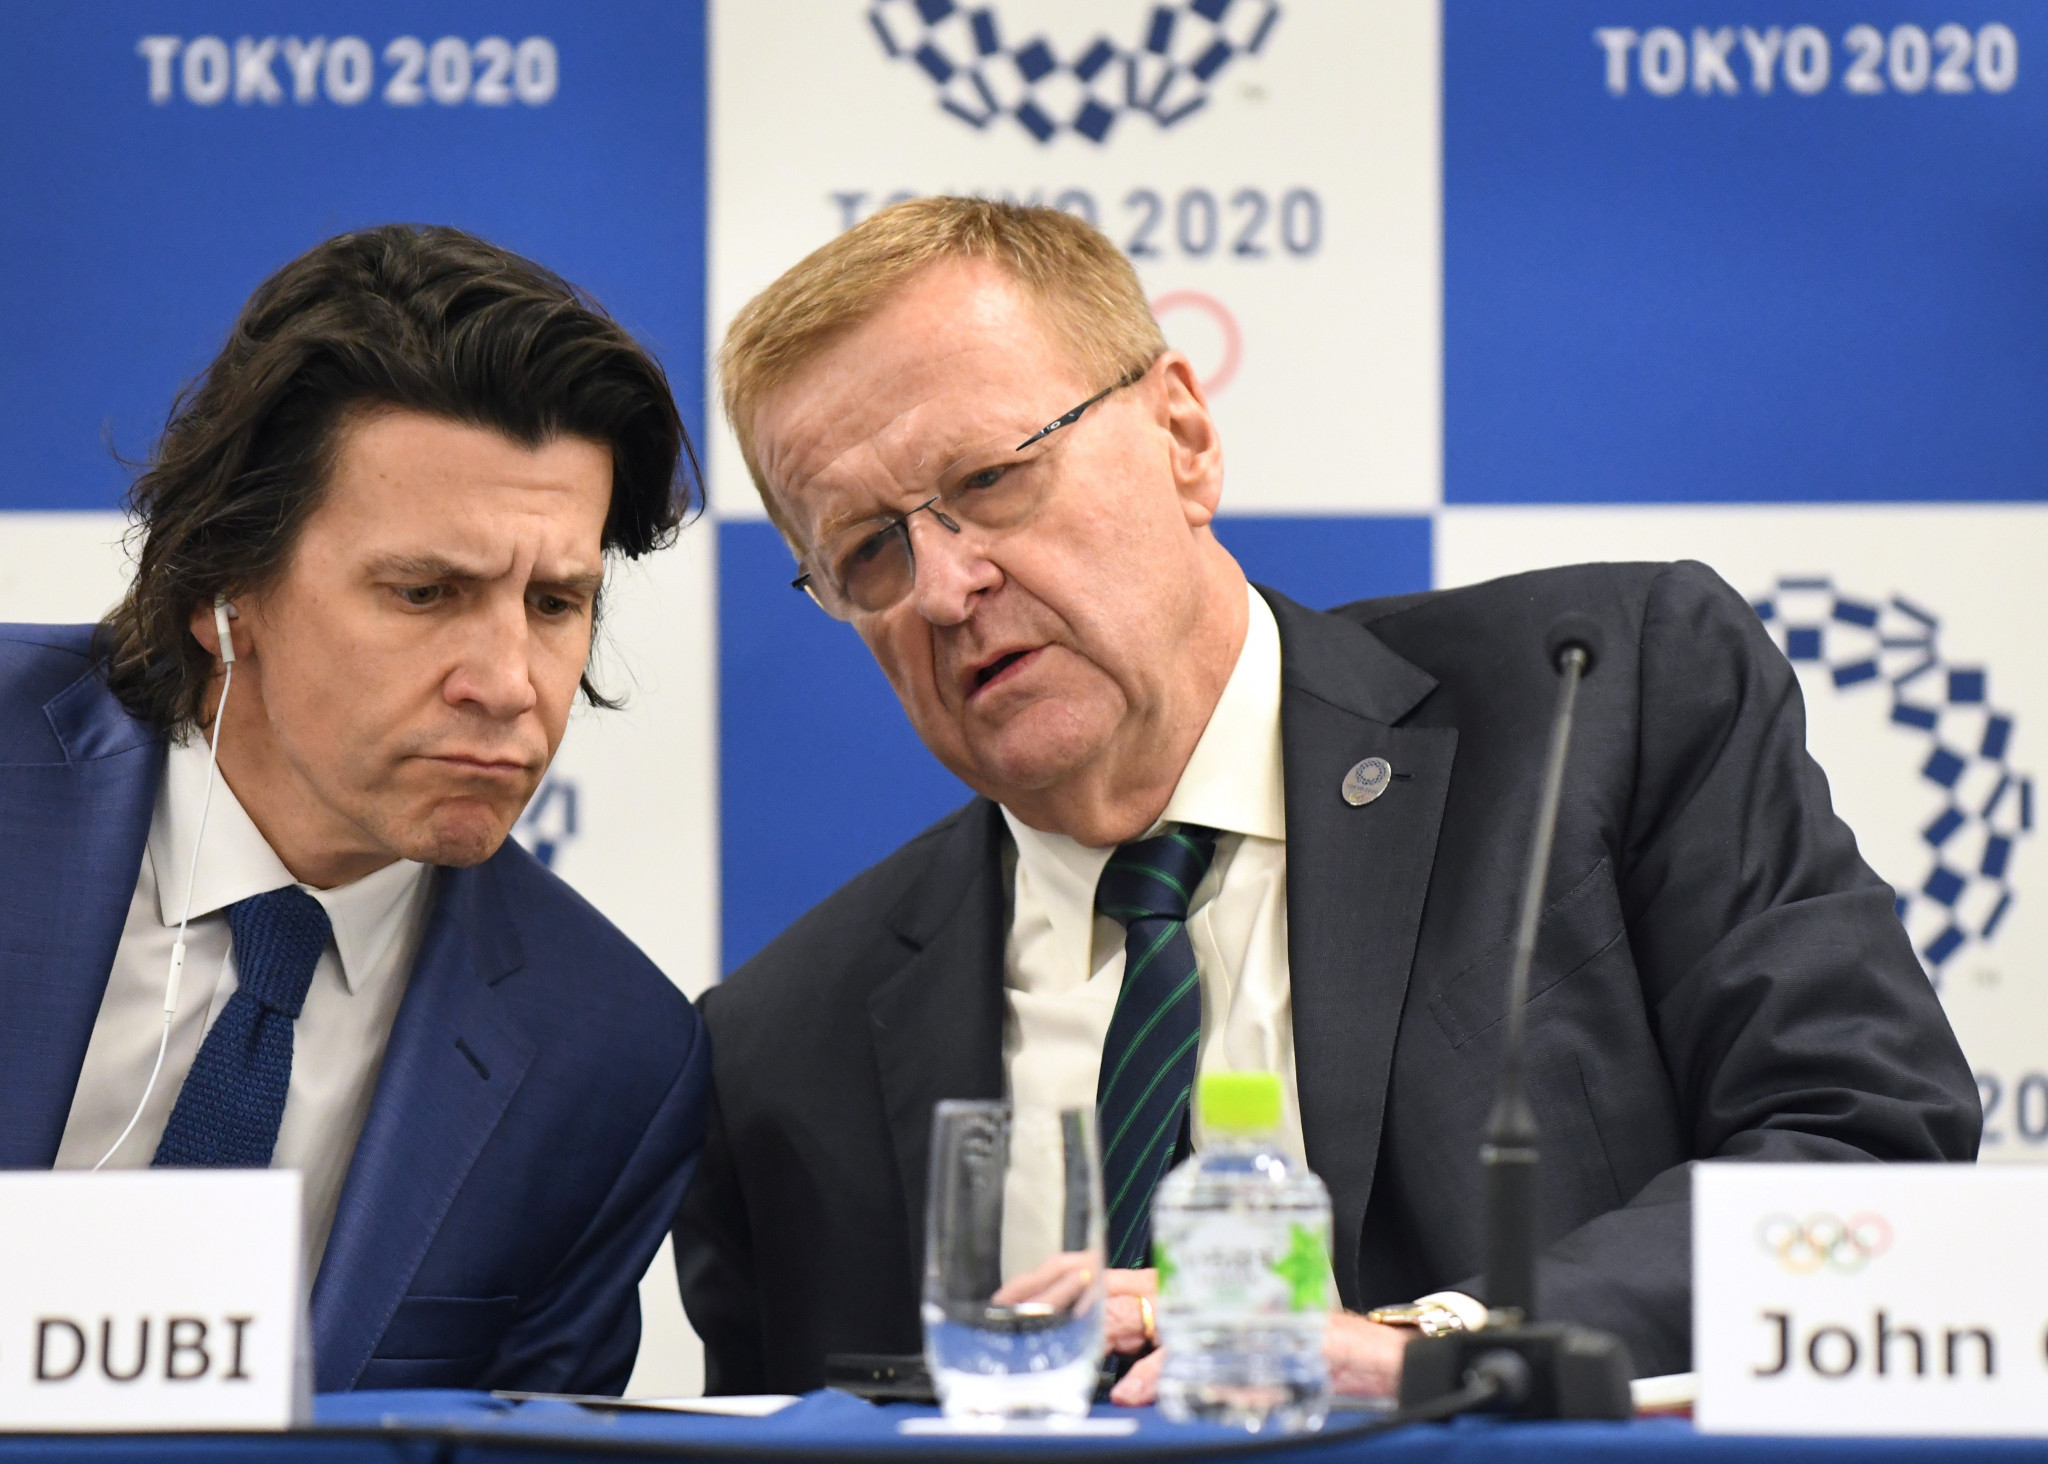 IOC Coordination Commission set to conduct sixth inspection of Tokyo 2020 preparations